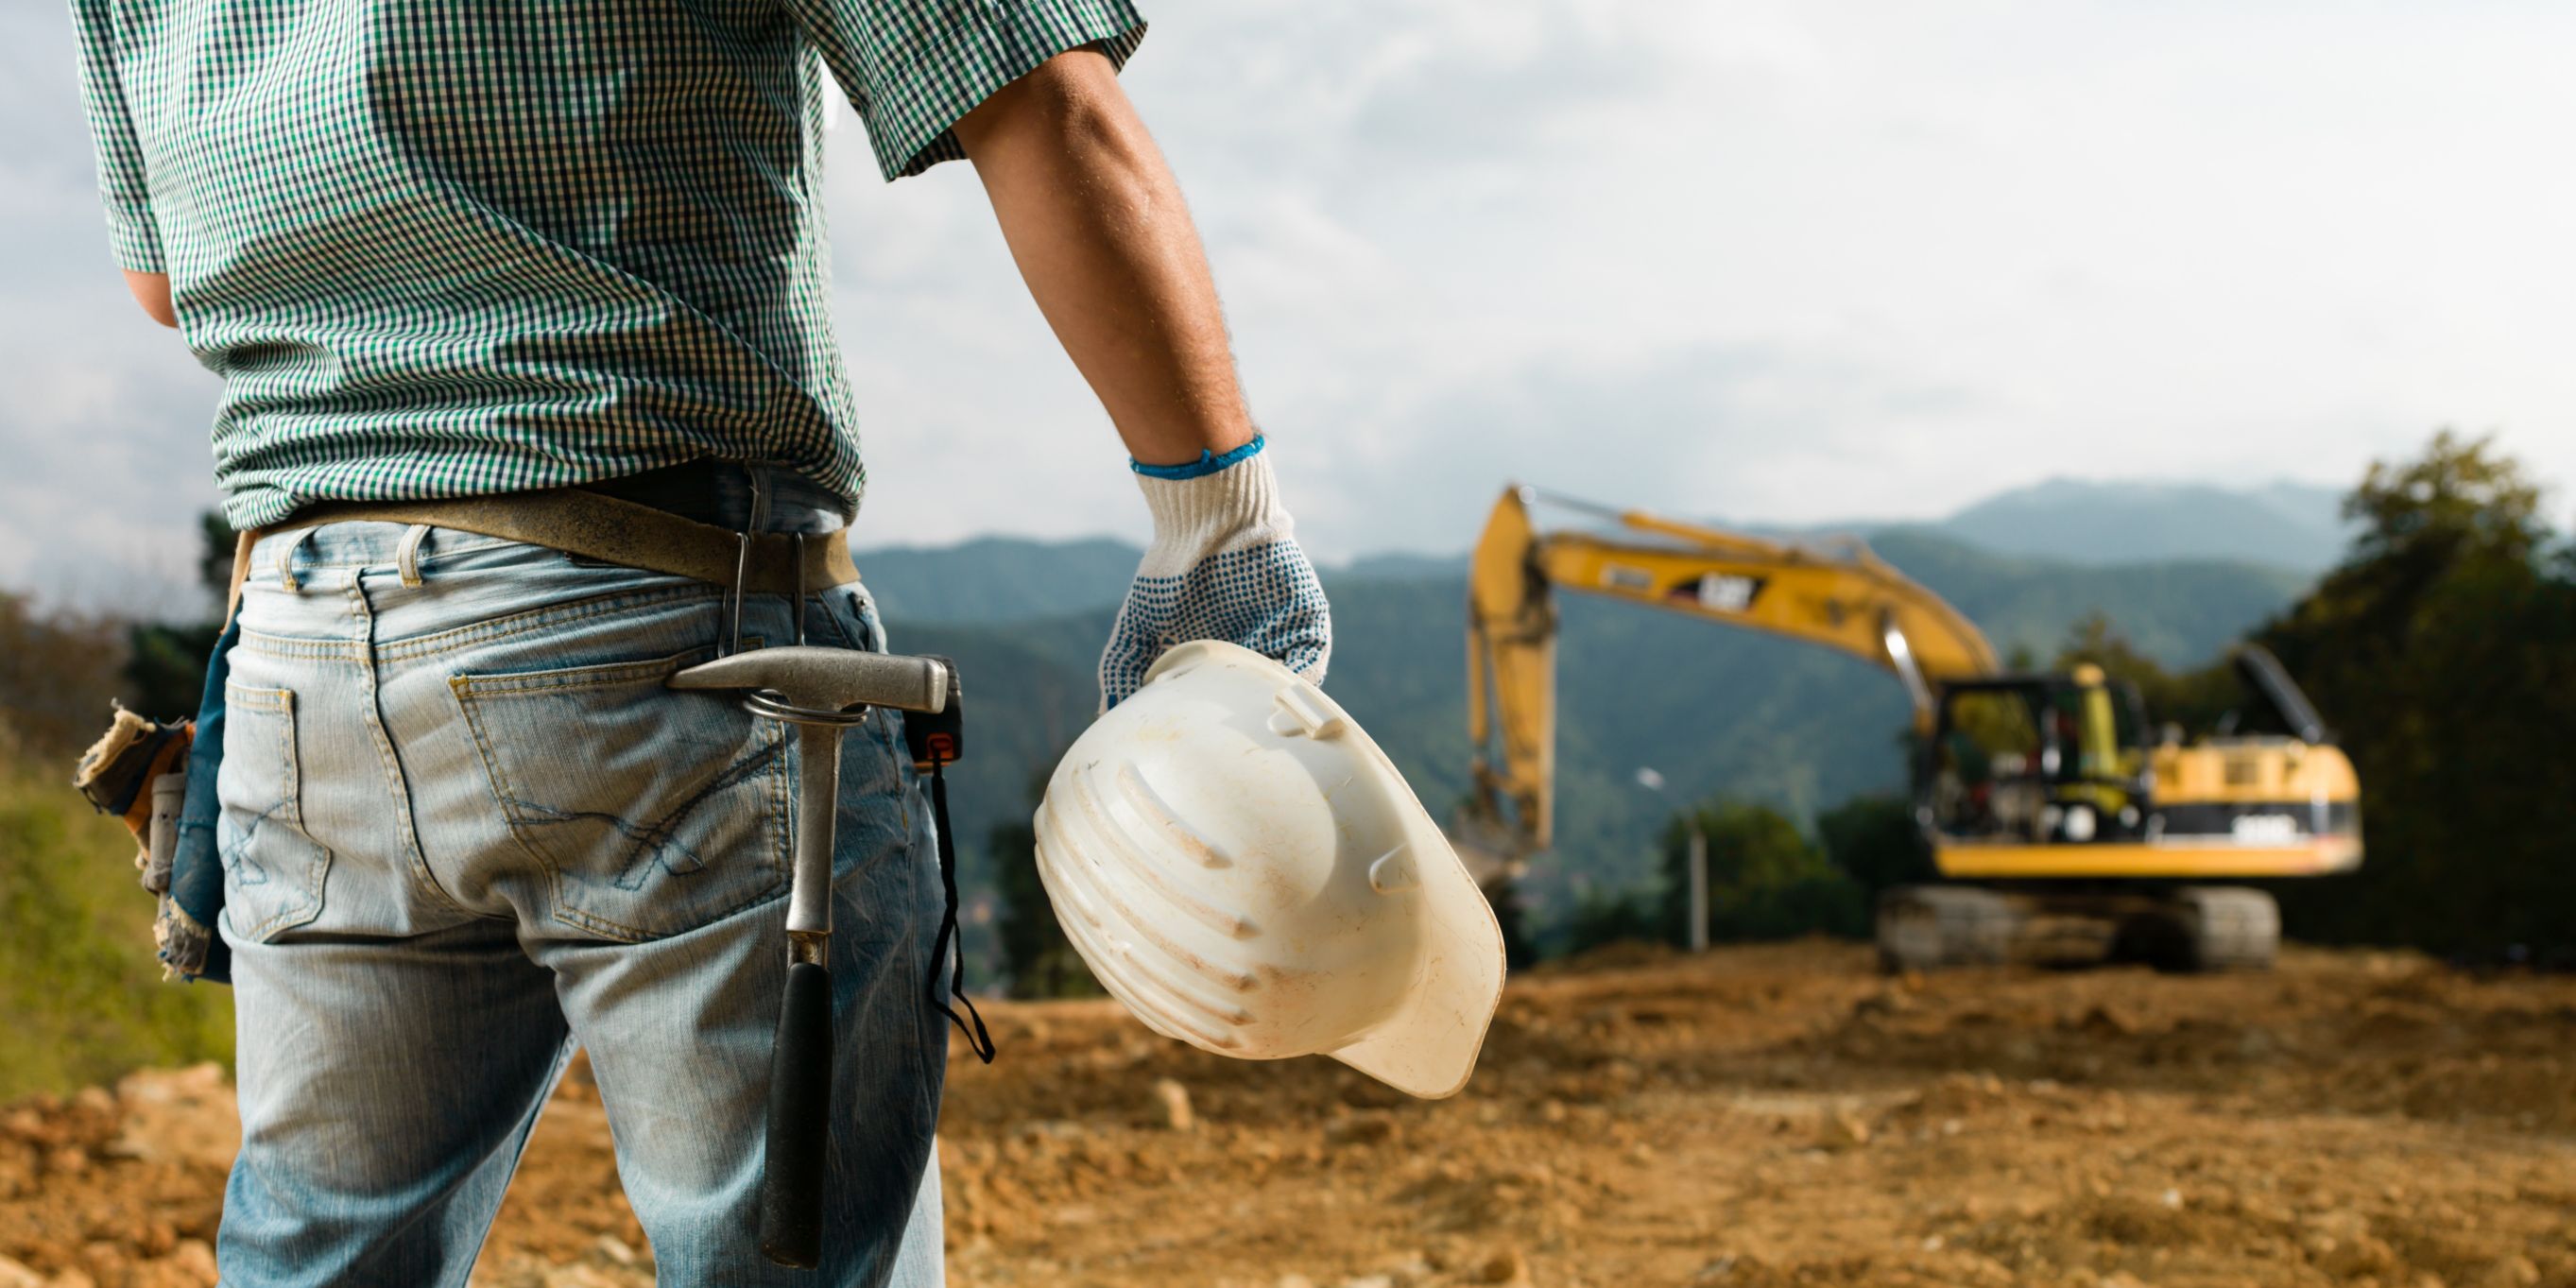 General Contractor vs. Subcontractor: What's the Difference?